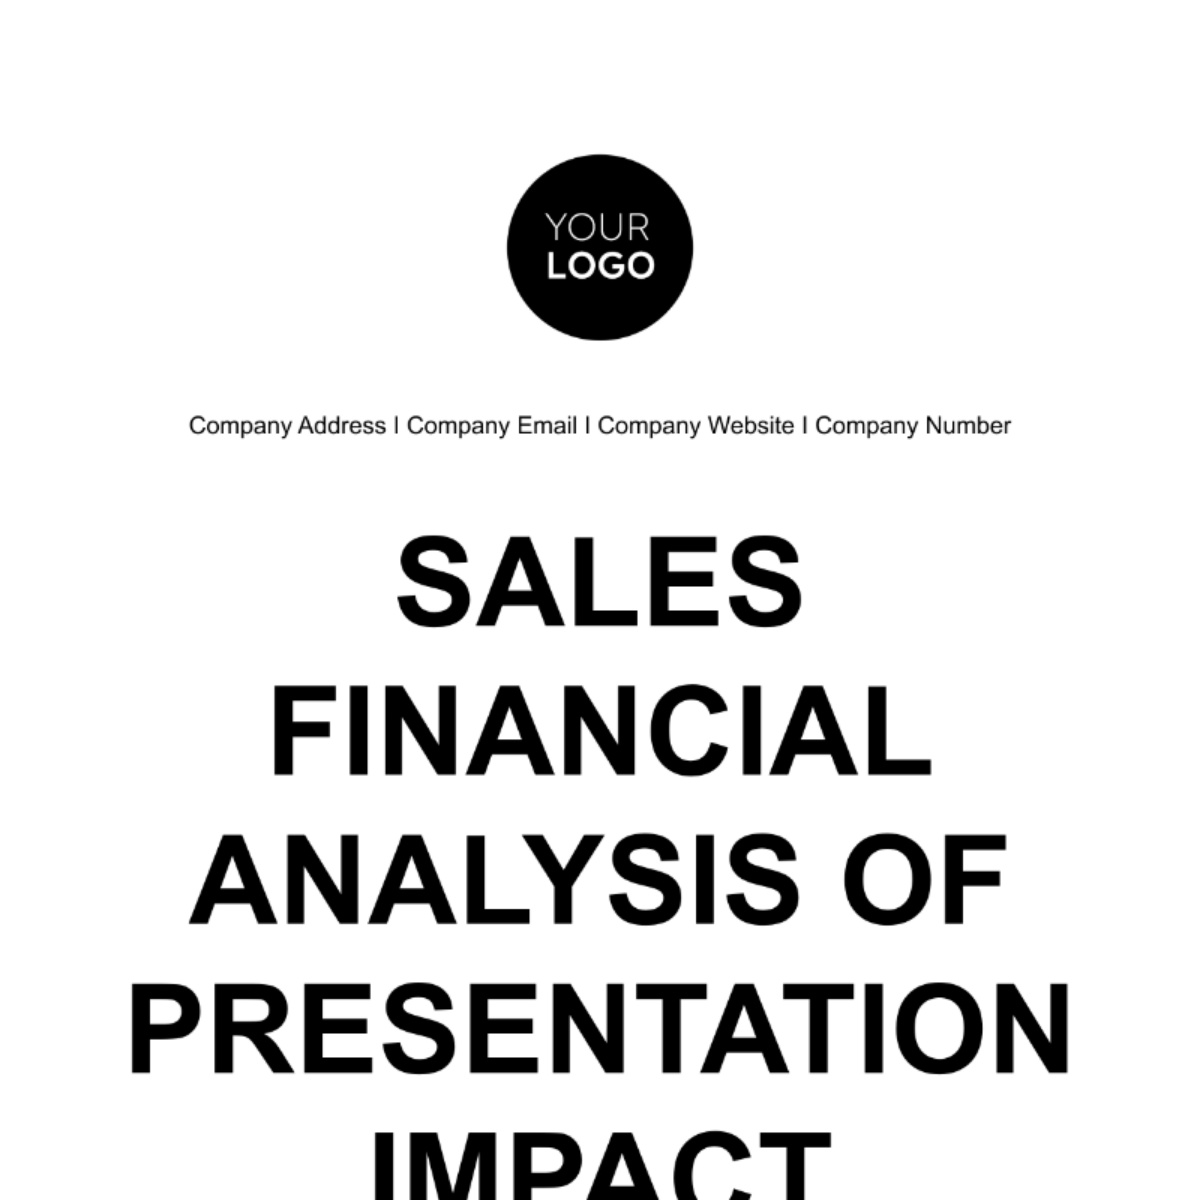 Free Sales Financial Analysis of Presentation Impact Template